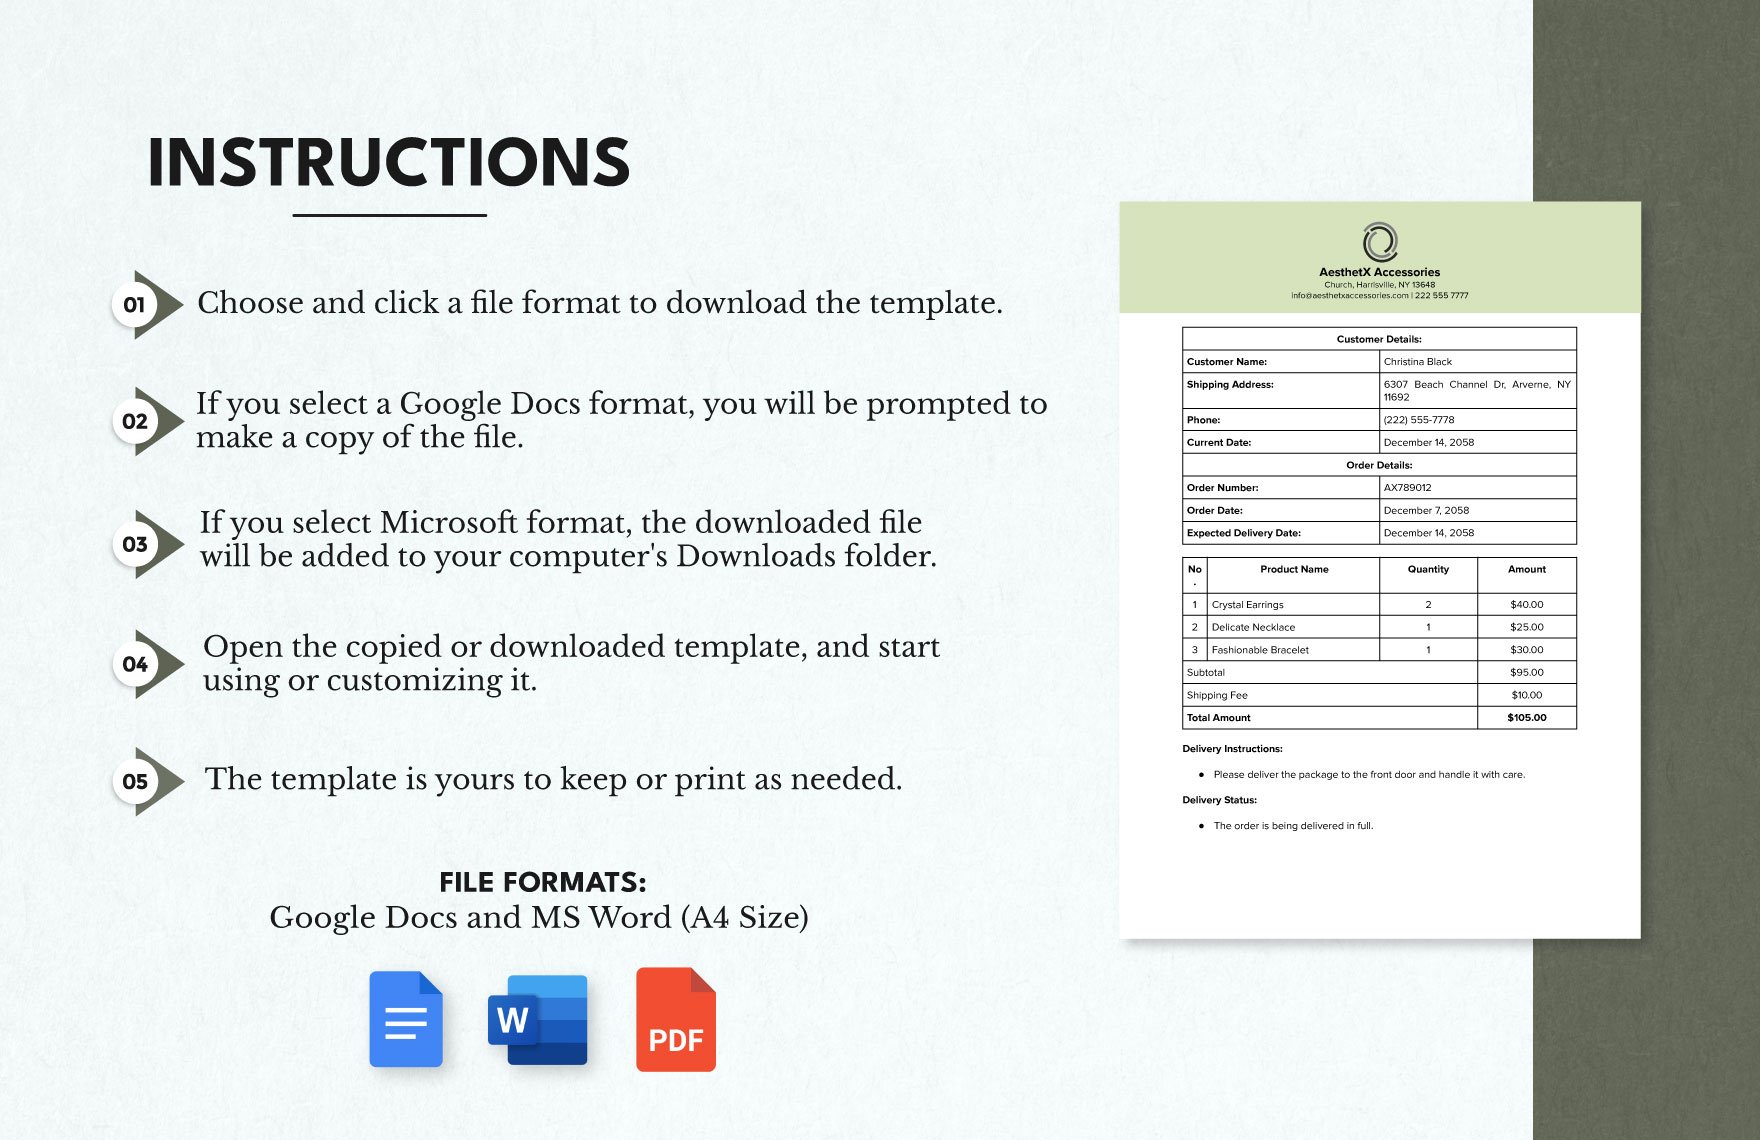 Order Delivery Note Template